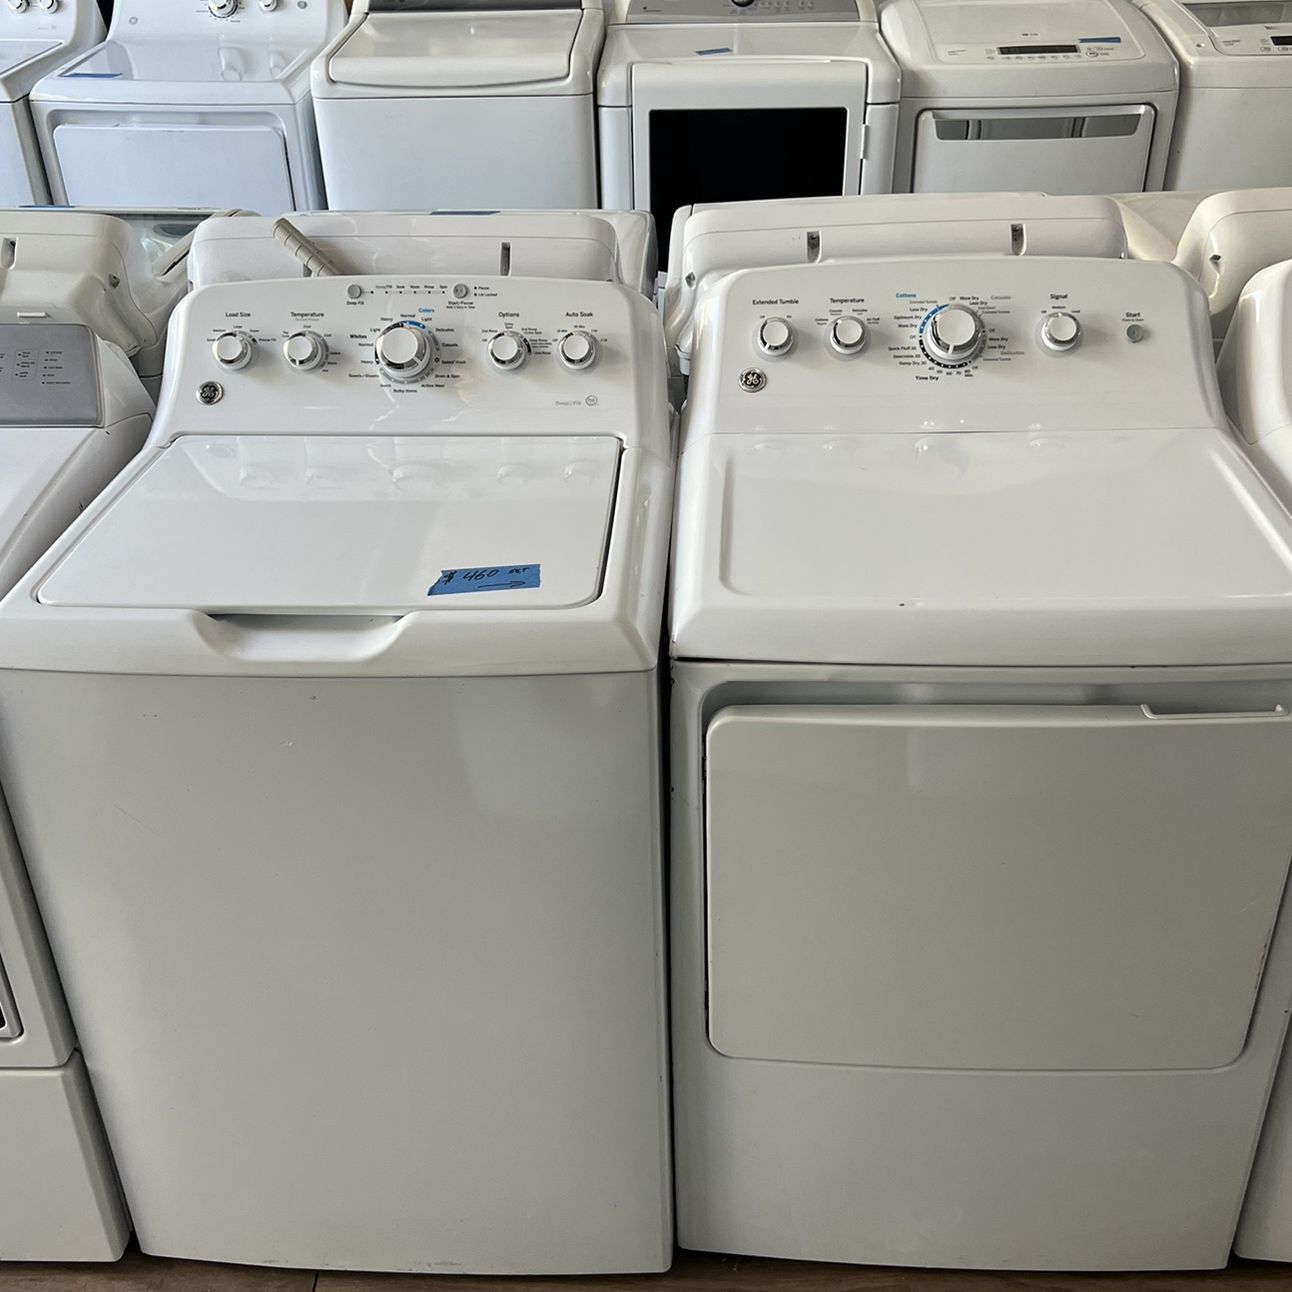 GE Washer&dryer Large Capacity Set   60 day warranty/ Located at:📍5415 Carmack Rd Tampa Fl 33610📍 